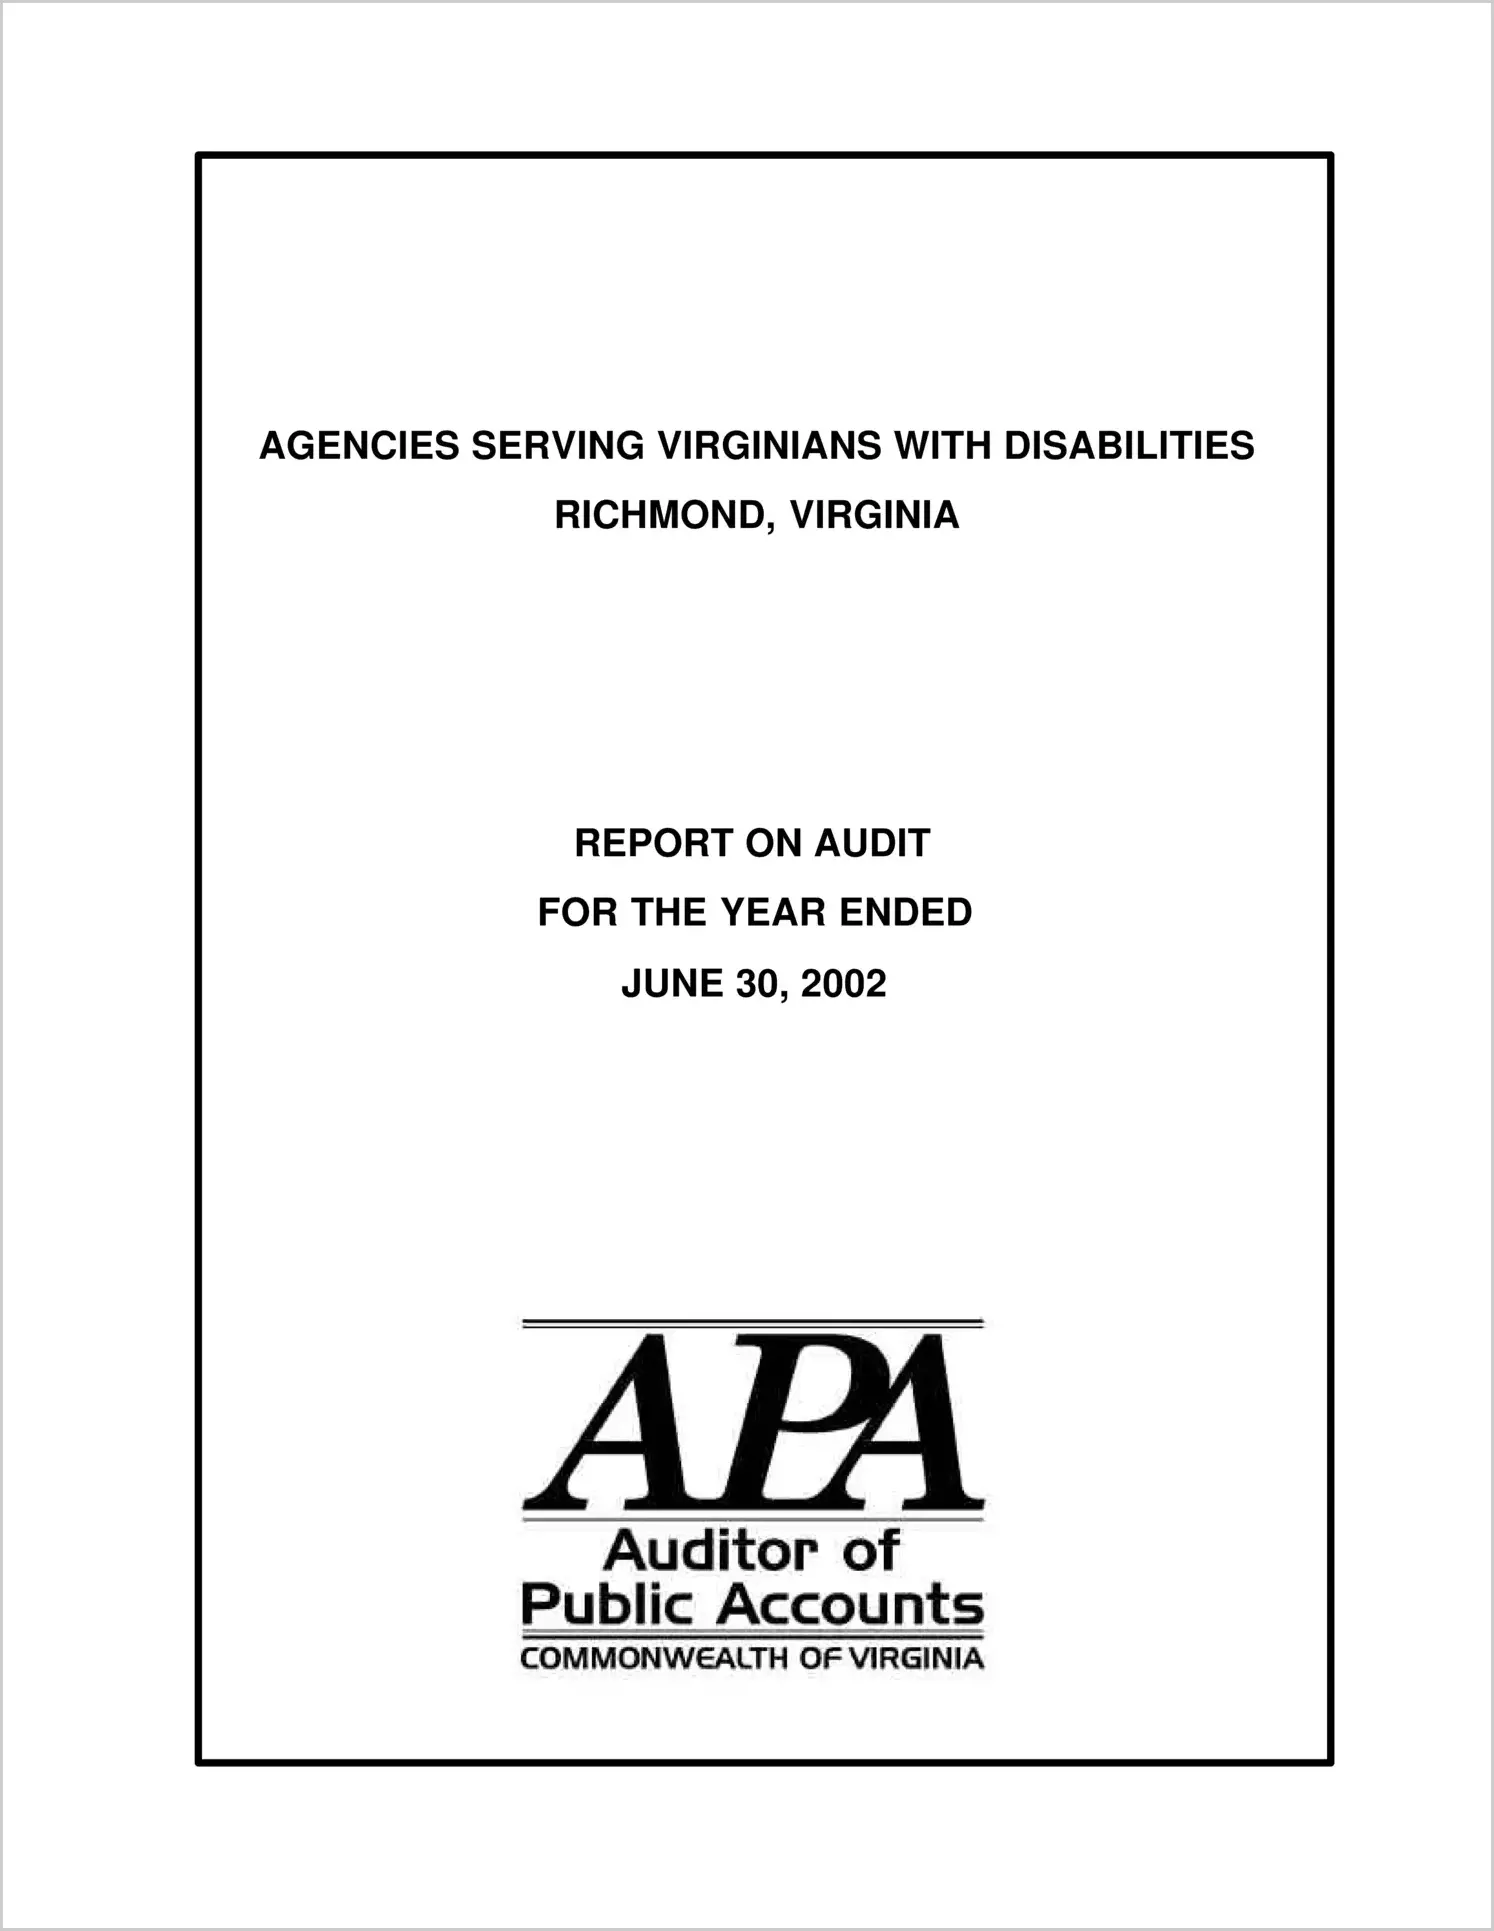 Agencies Serving Virginians with Disabilities for the year ended June 30, 2002